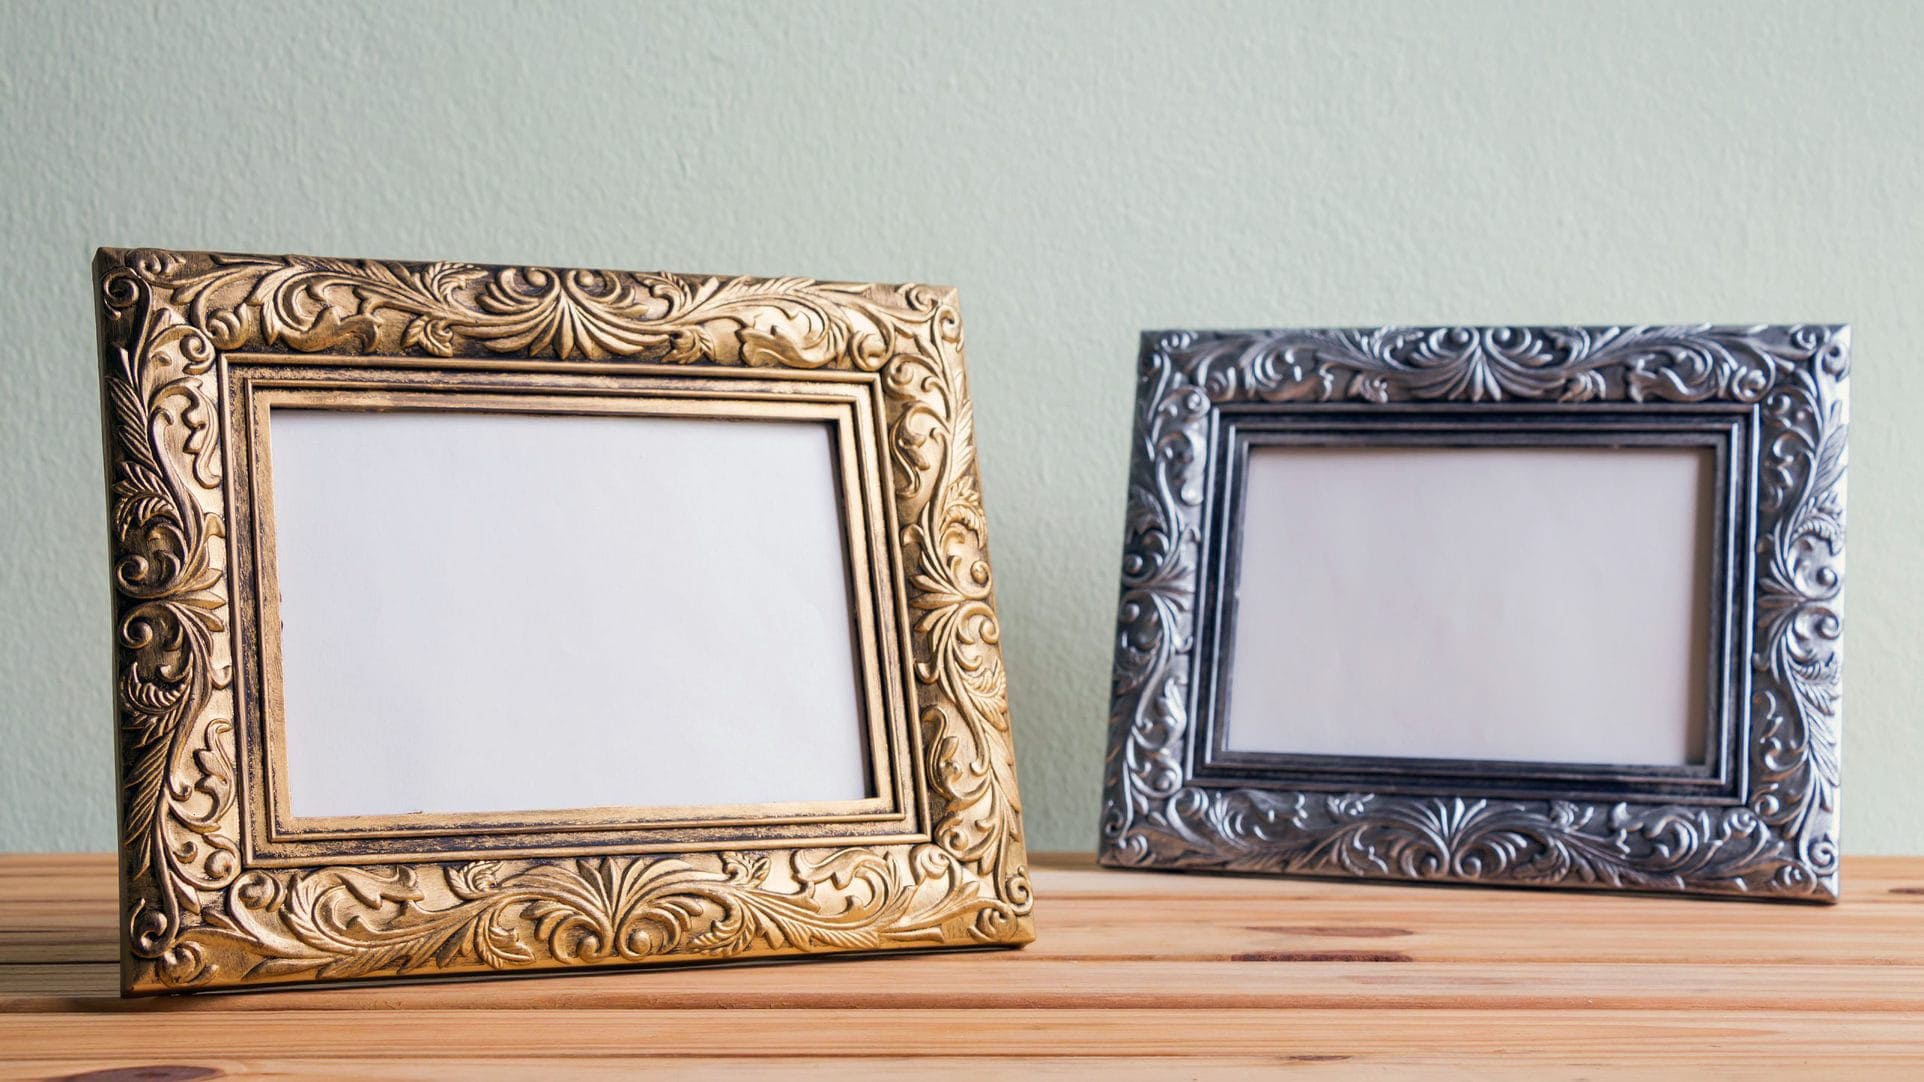 How To Clean A Tarnished Picture Frame